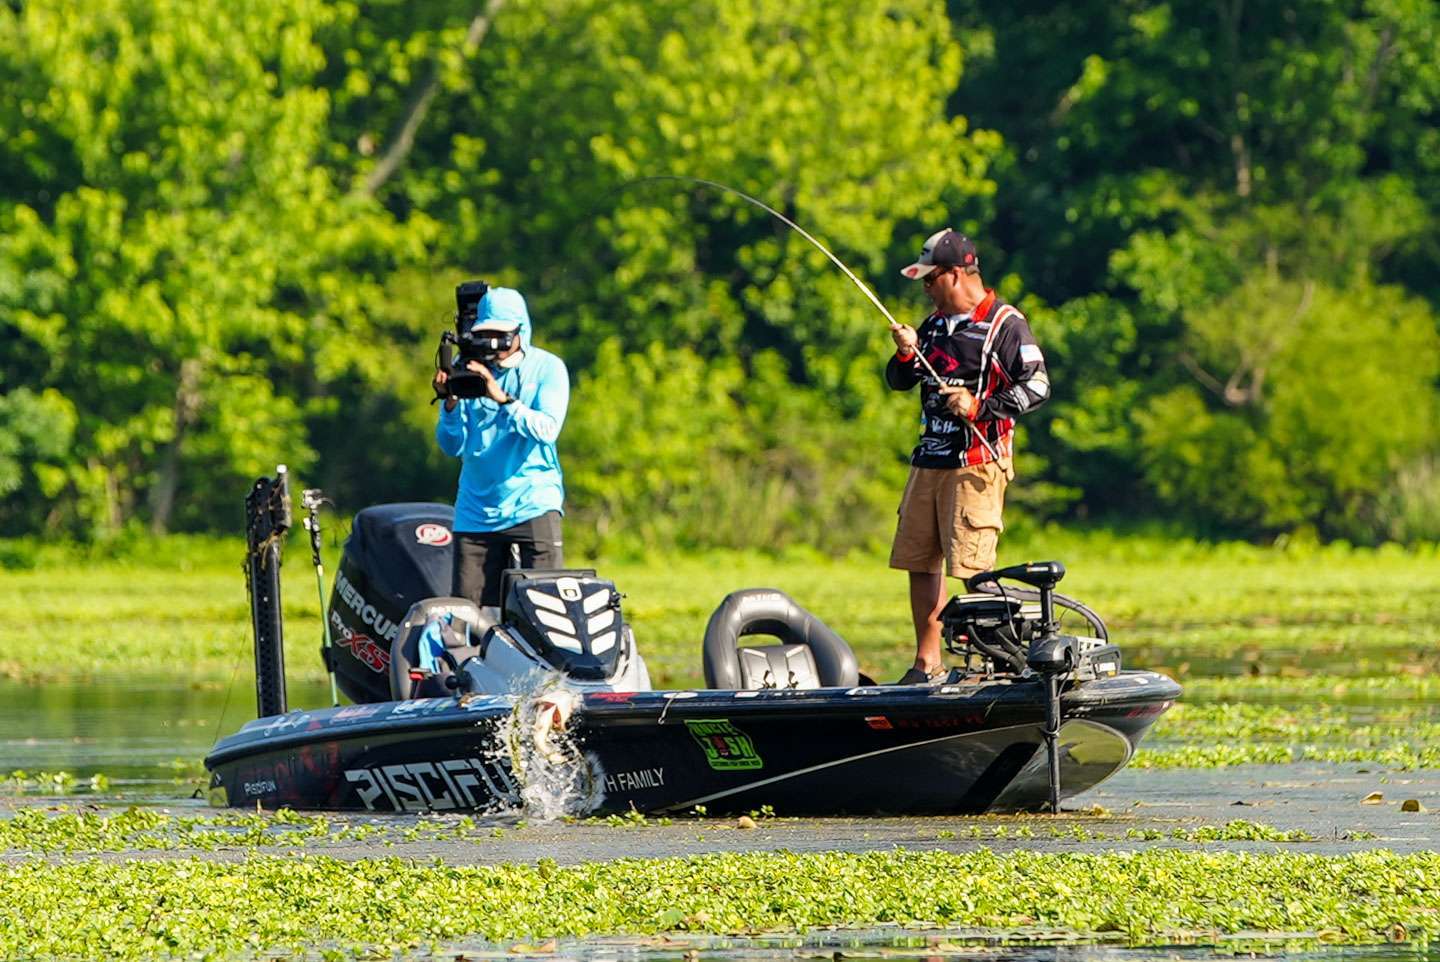 That angler was Caleb Kuphall, whose winning weight of 85 pounds, 14 ounces included an impressive scorecard. The Wisconsin Elite Series pro racked up limits weighing 27-10, 15-10, 23-9 and 19-1, for an impressive 17-4 winning margin over second place.  